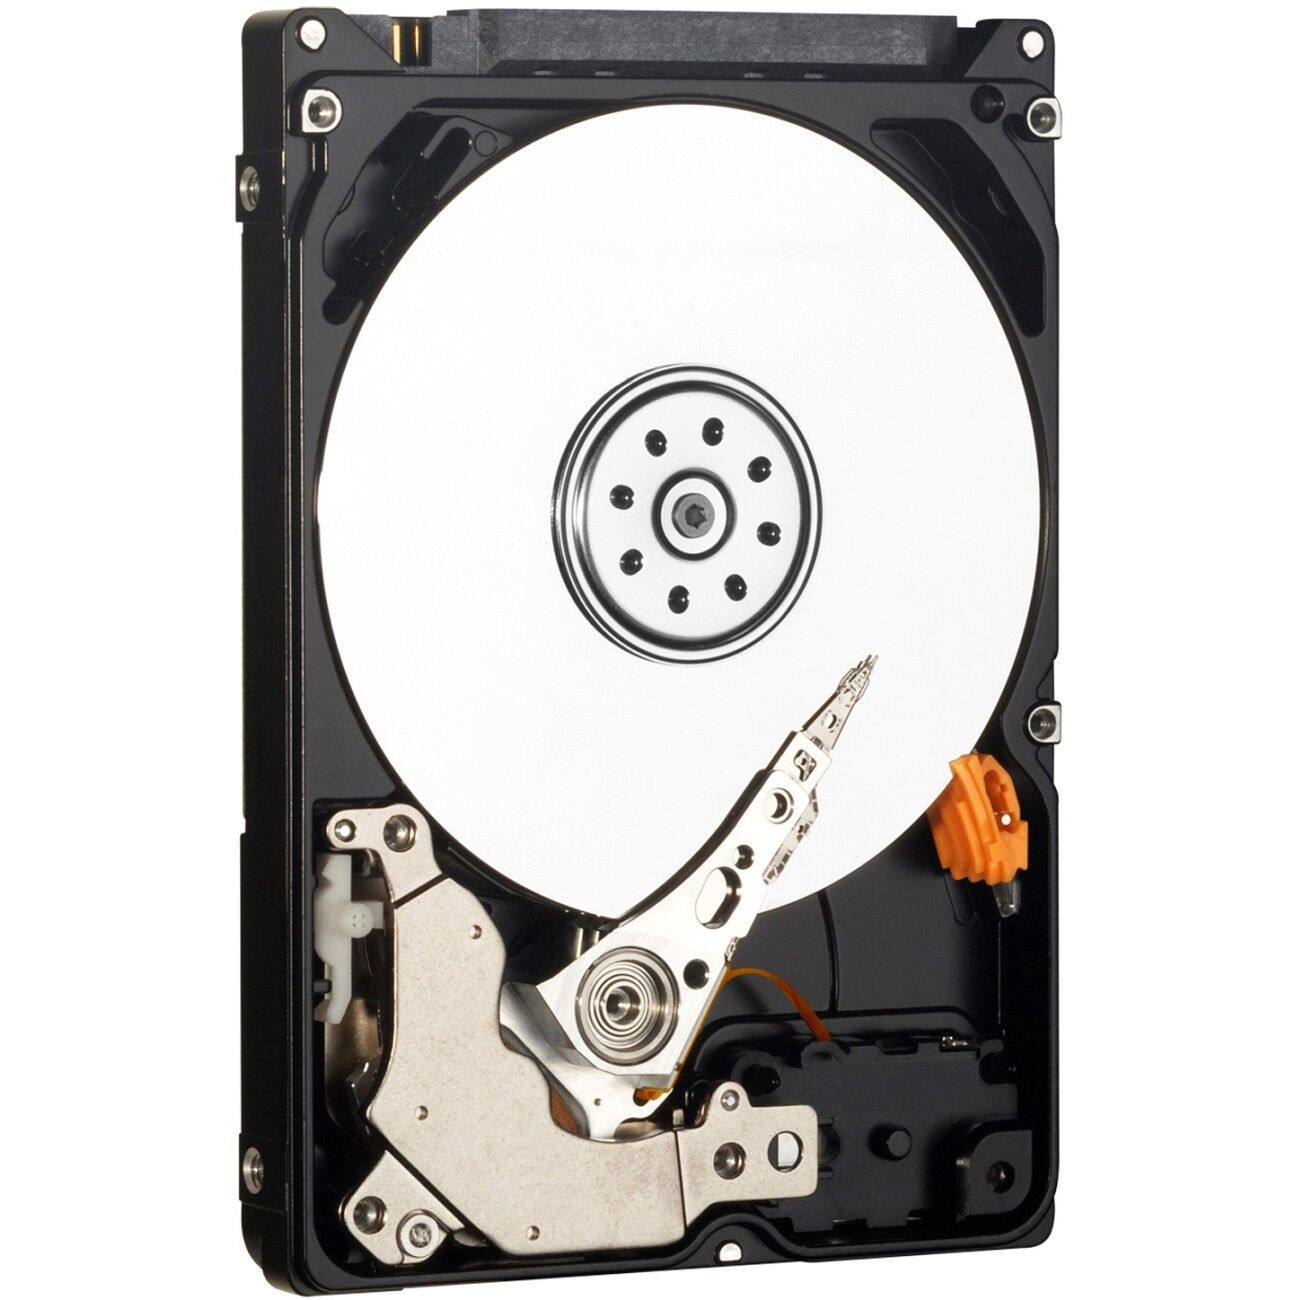 Primary image for 1TB Hard Drive for Lenovo IdeaPad P400 Touch, P500, P500 Touch, P580, P585